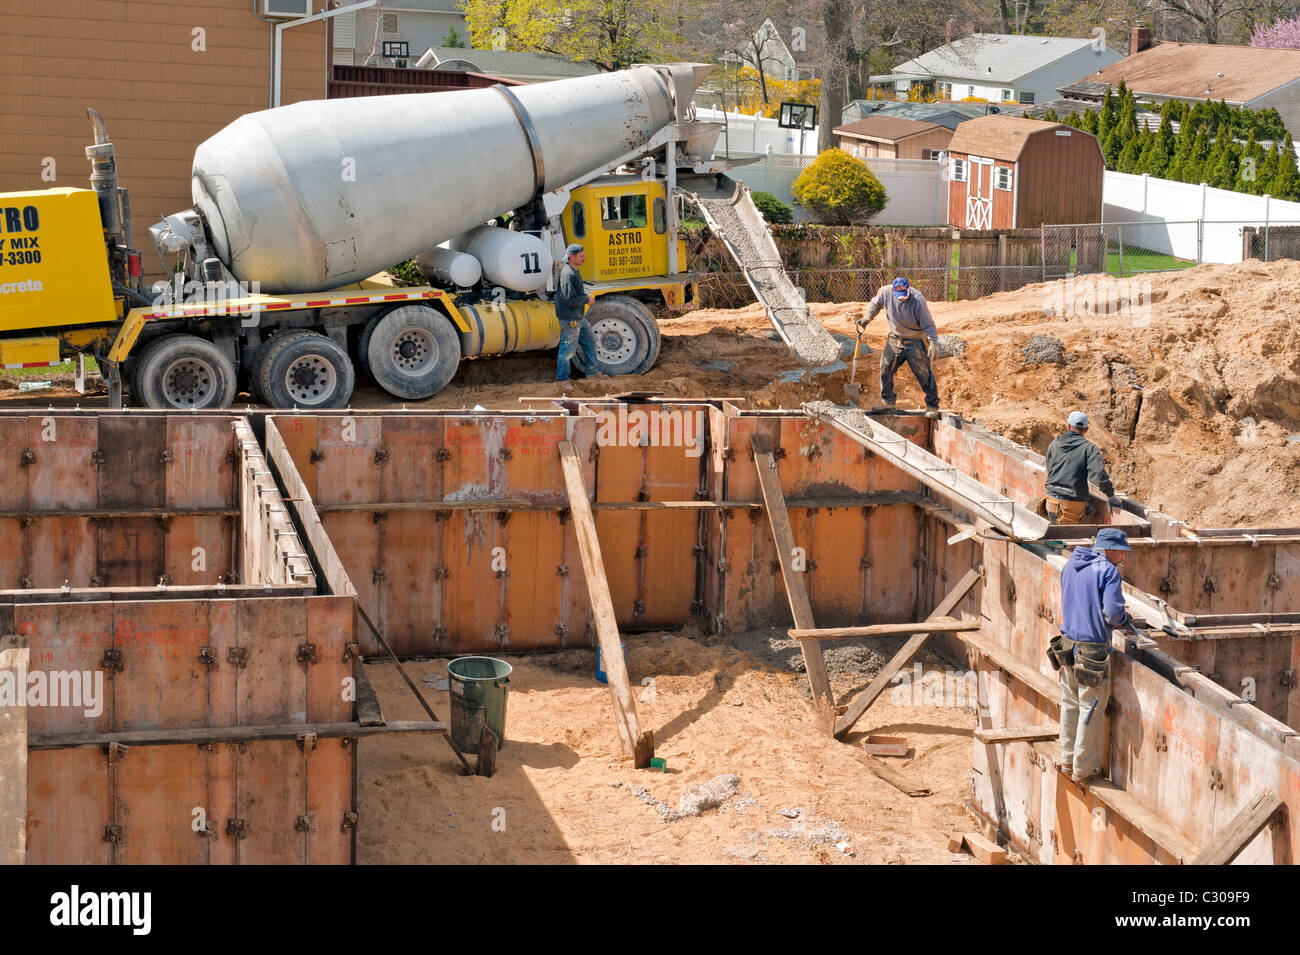 https://c8.alamy.com/comp/C309F9/new-home-construction-workers-setting-up-cement-mixer-chute-to-pour-C309F9.jpg